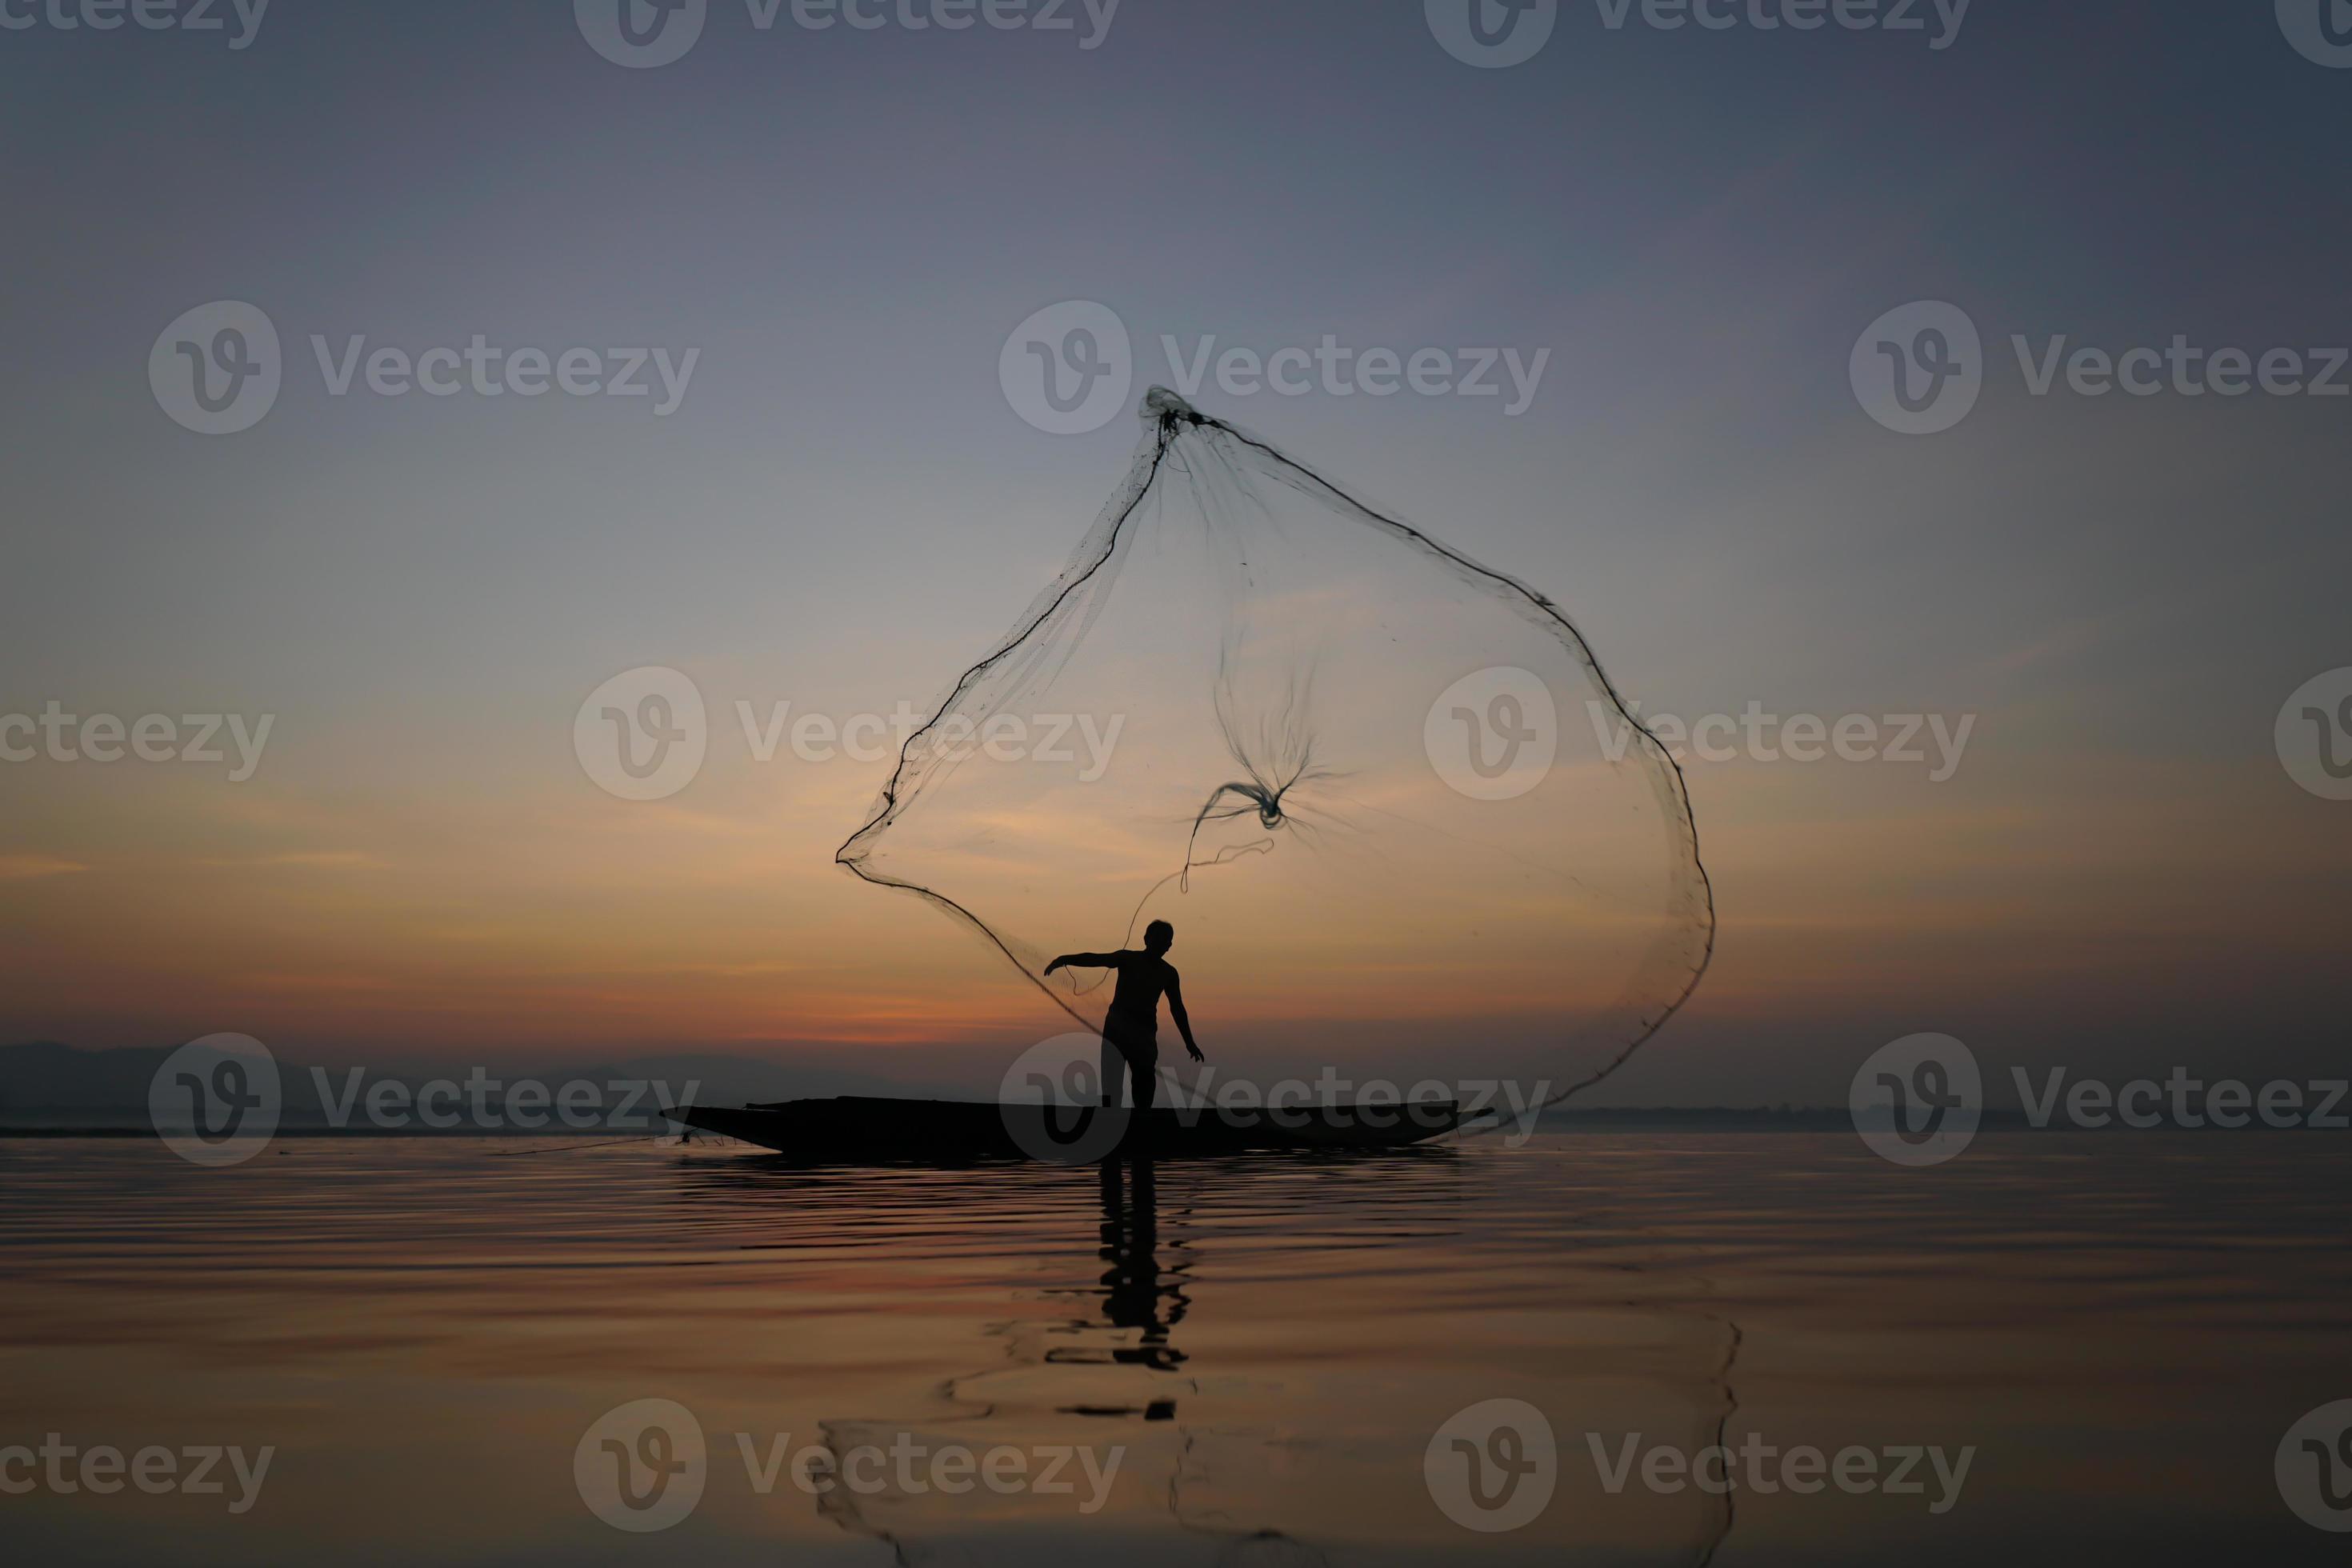 fisherman throwing fishing net to cathch fish in hte lake in the